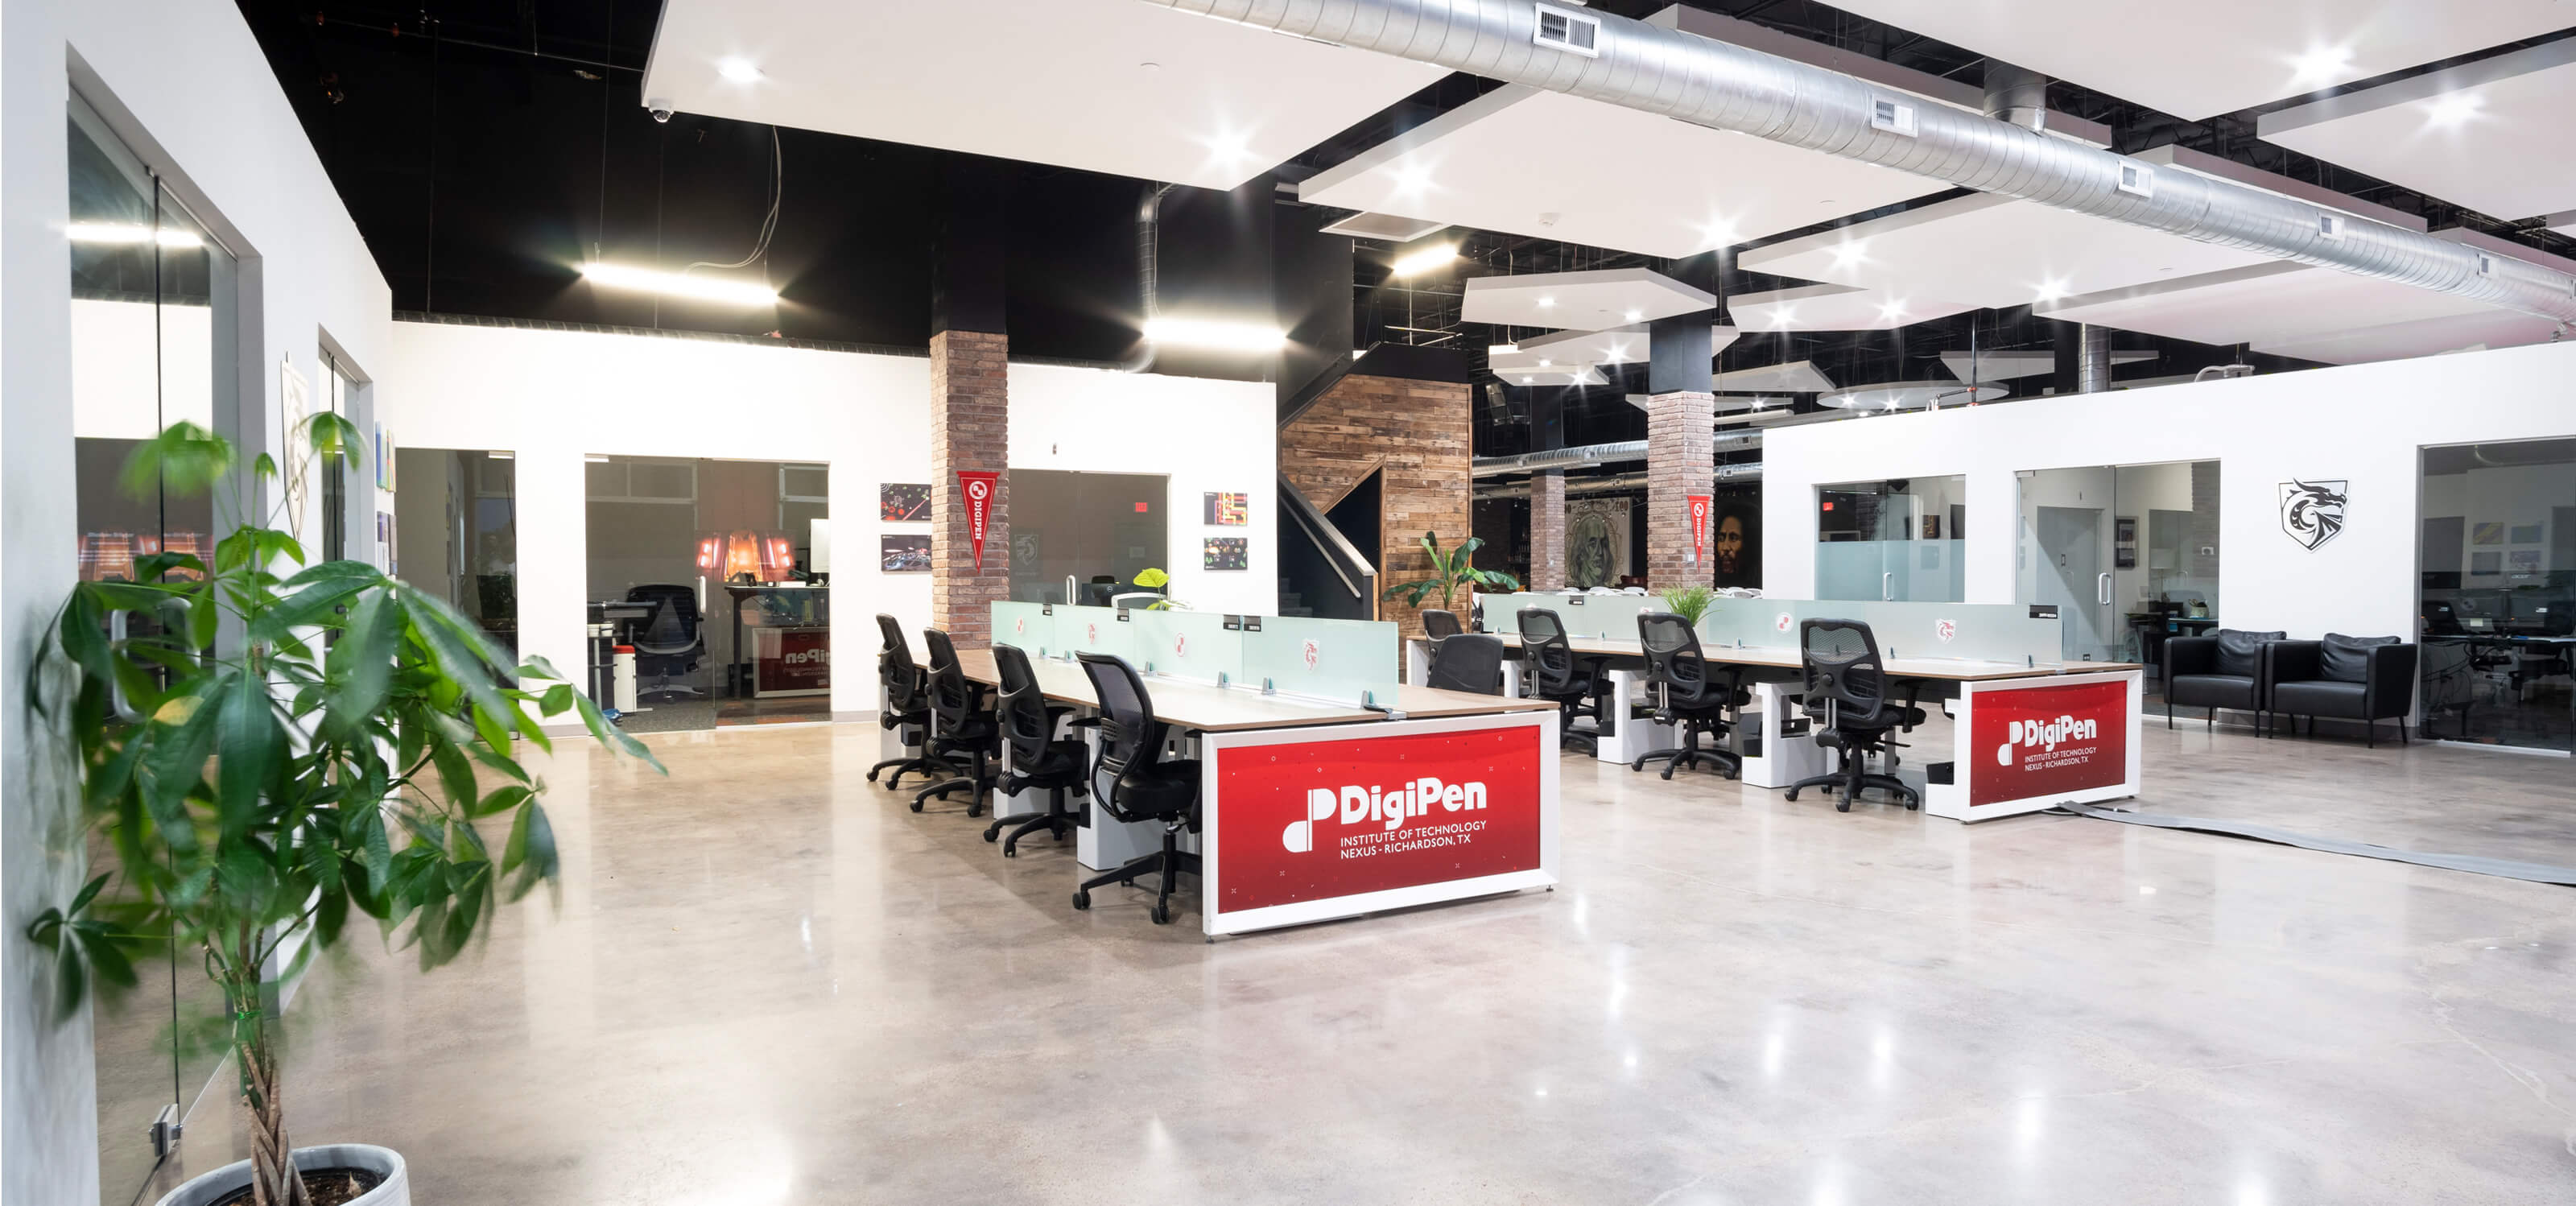 An open workspace area with multiple stations with the DigiPen logo on them